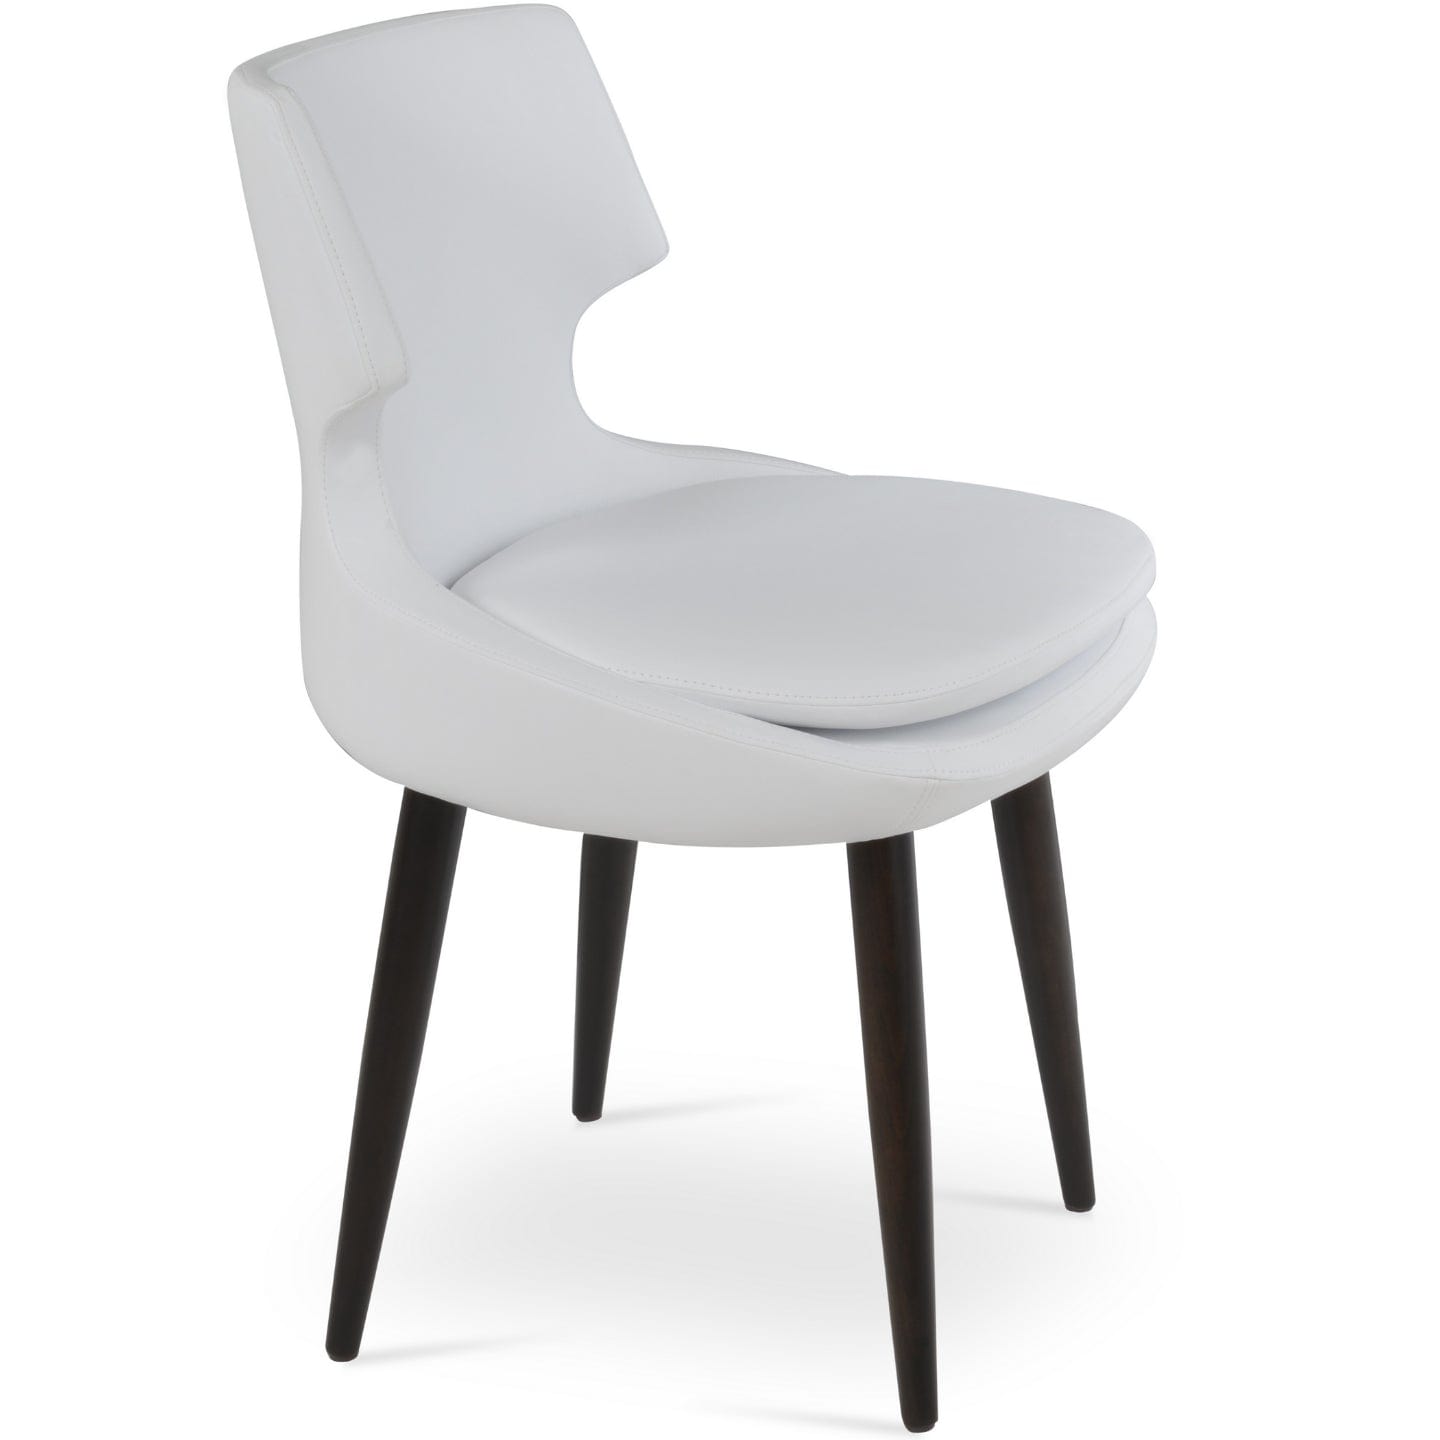 sohoConcept Kitchen & Dining Room Chairs Patara Wood | Wood Base | Leatherette Seat | Dining Chair in White